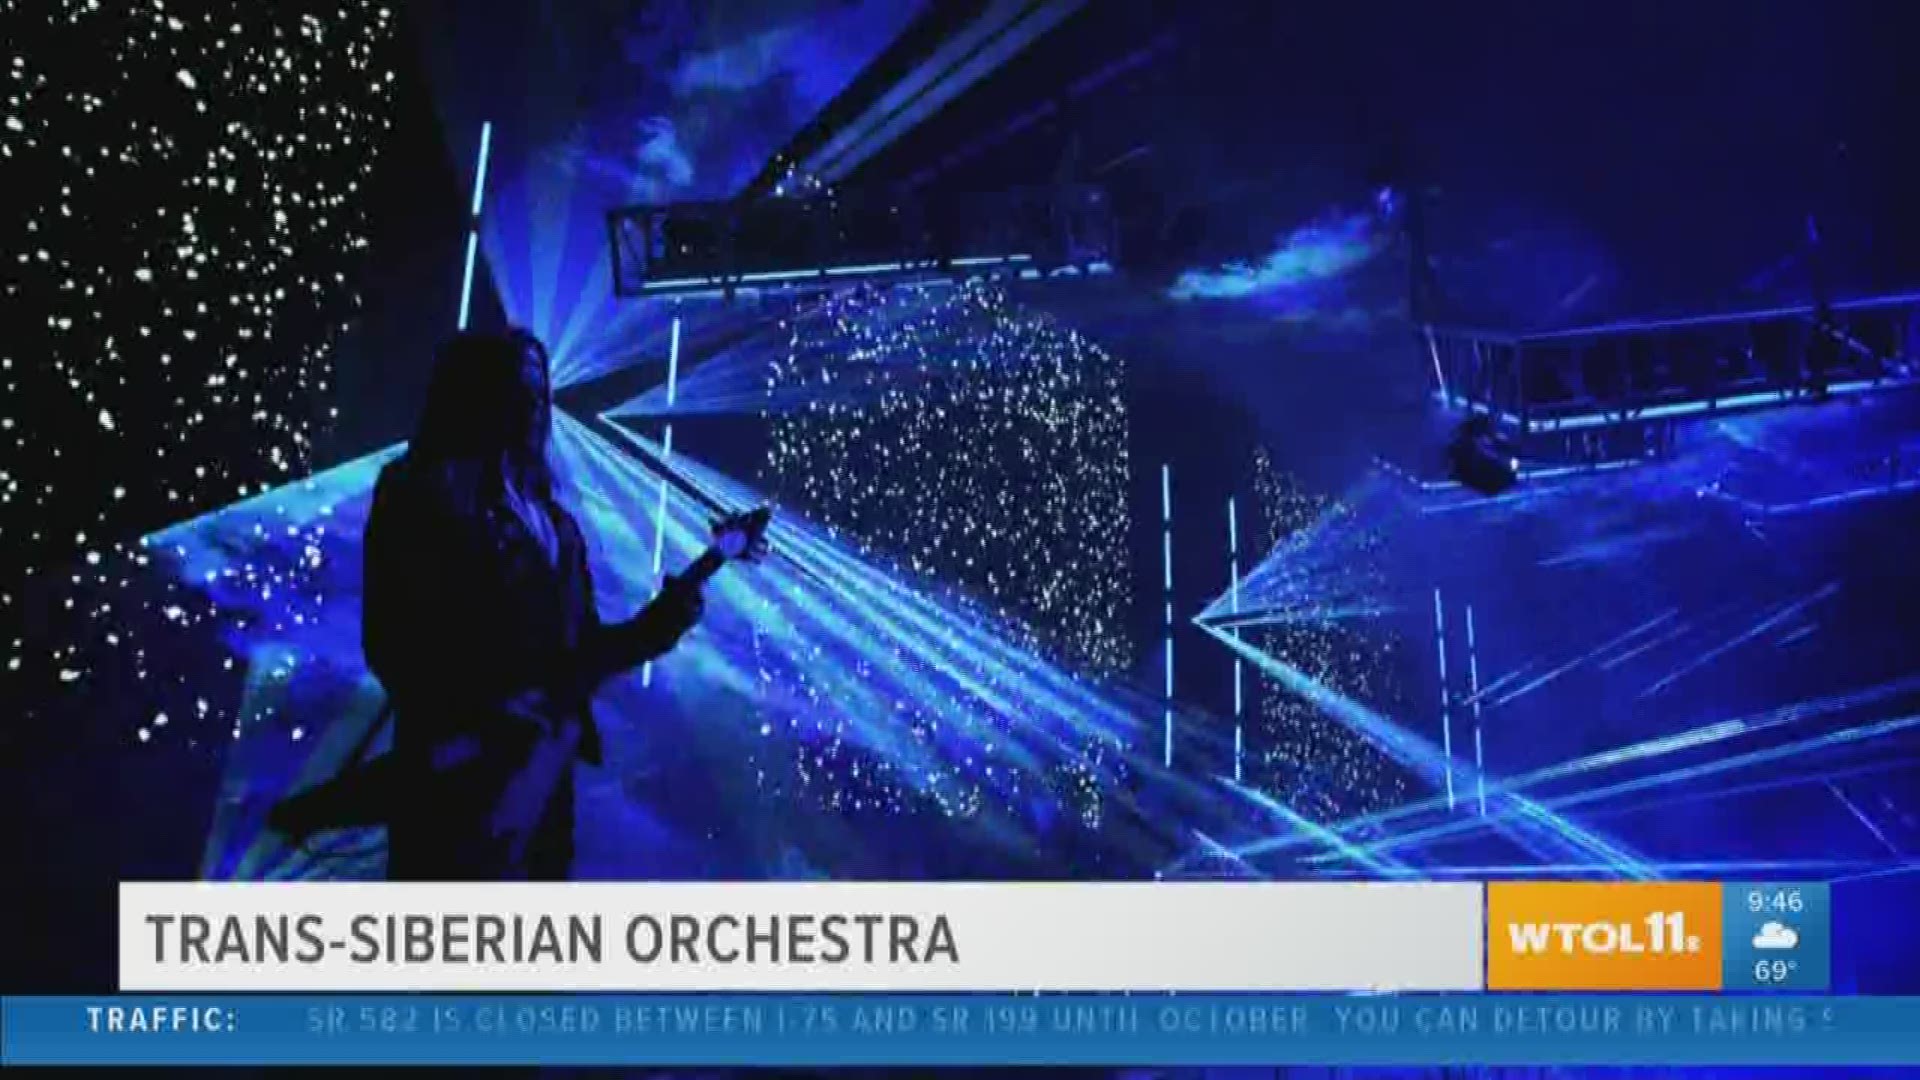 It's a huge, amazing Christmas concert - the Trans Siberian Orchestra! They're back again in Toledo in November to help kick off the Christmas season!